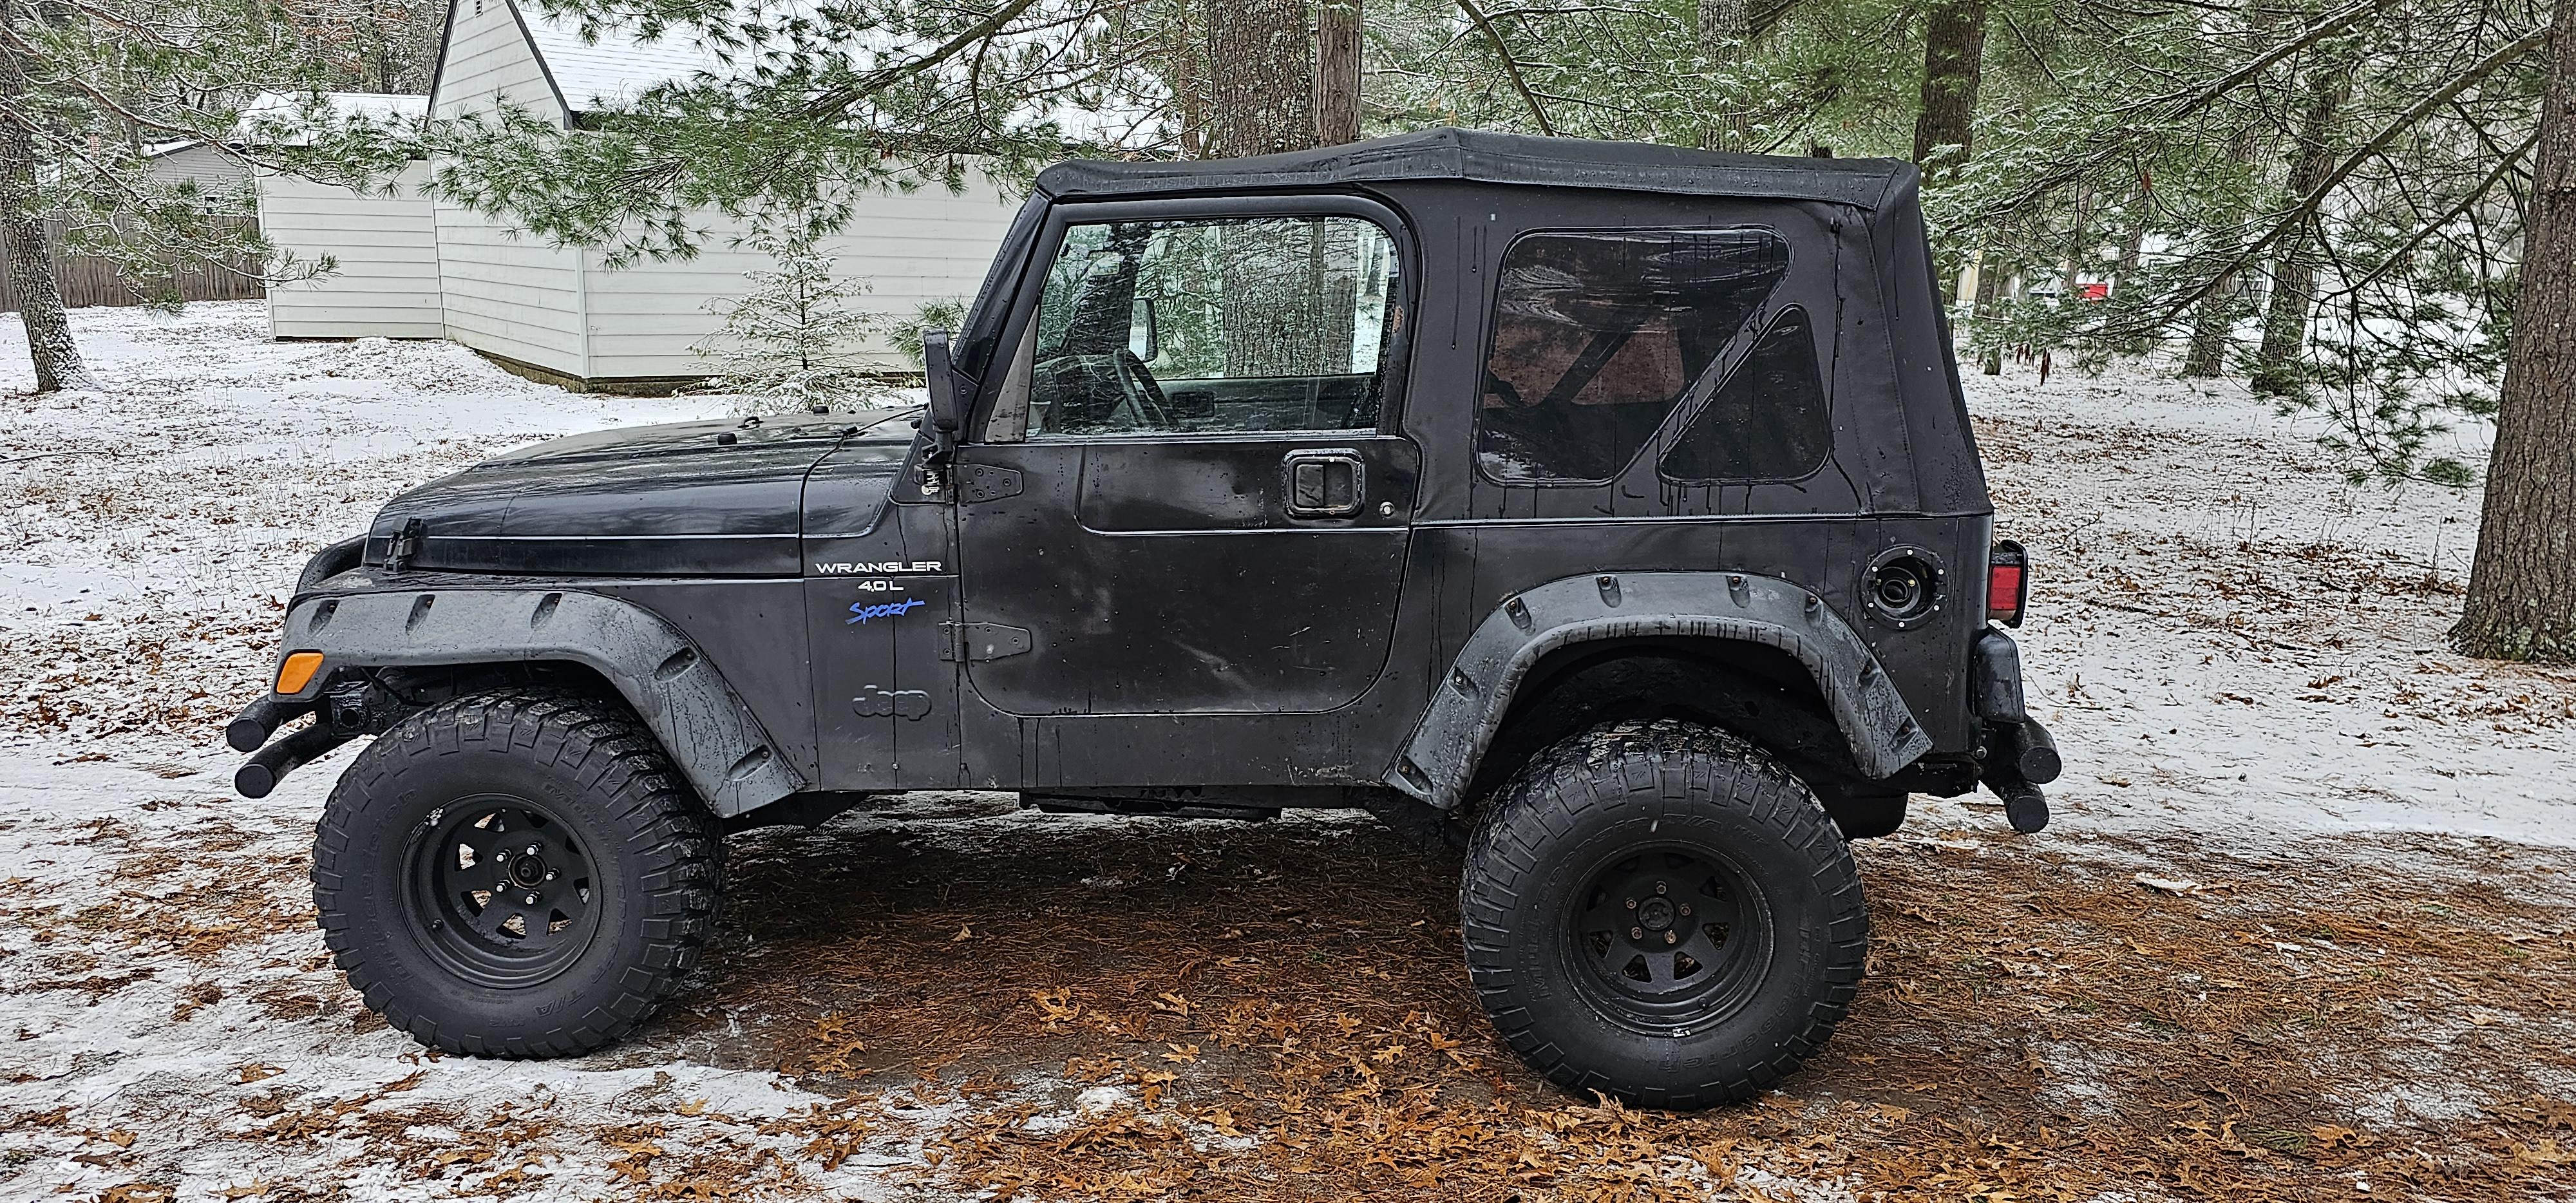 Are Jeep Wranglers Easy To Steal? Theft-Proof Tips Revealed